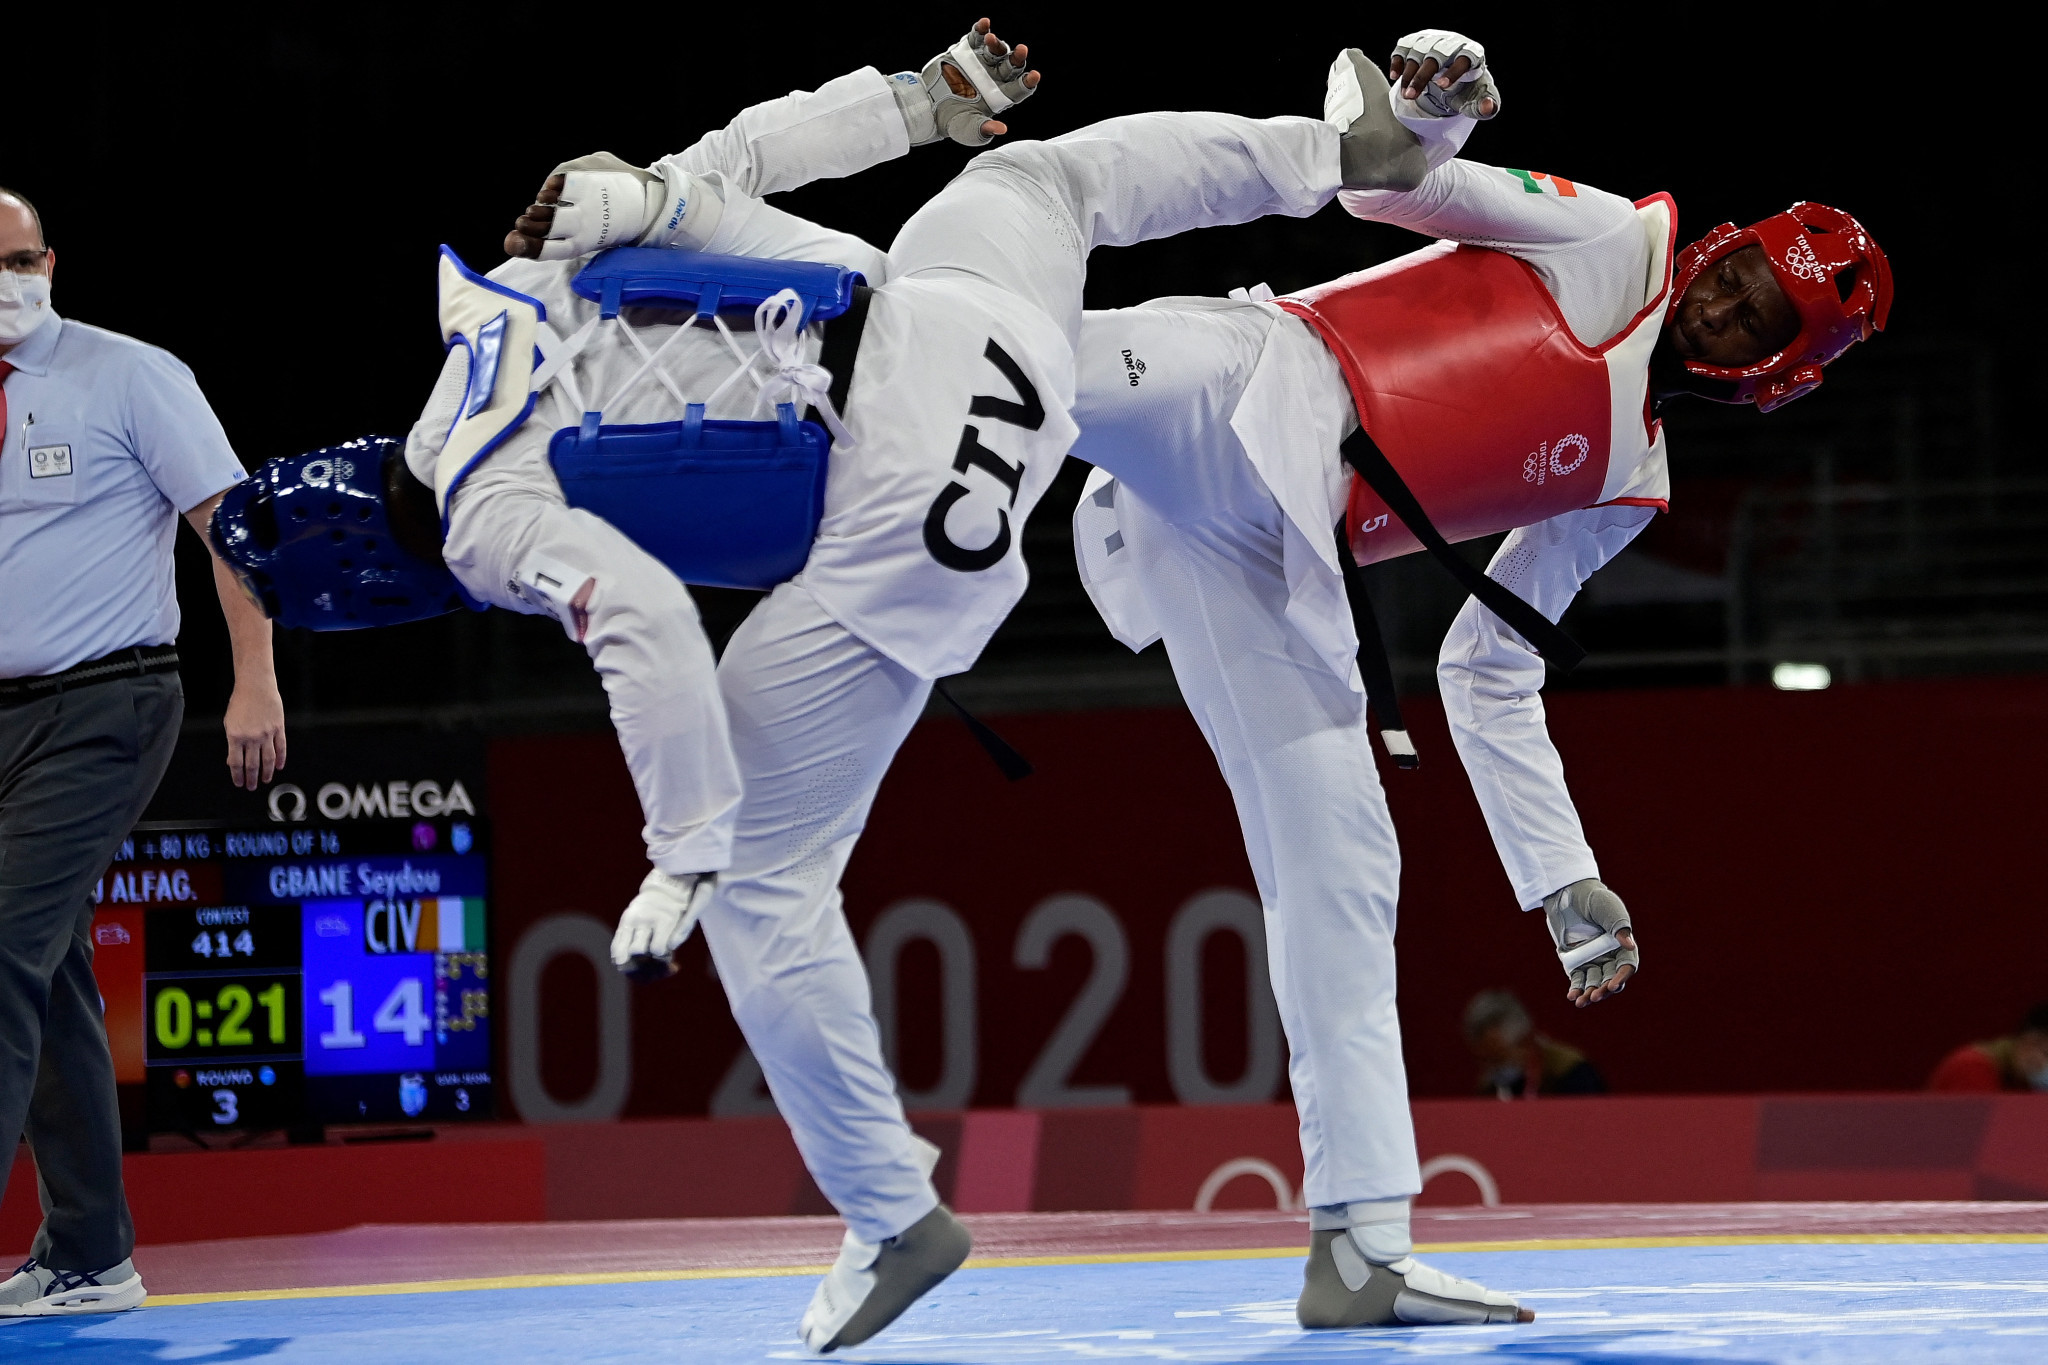 African nations have been encouraged to develop in successful sports such as taekwondo ©Getty Images